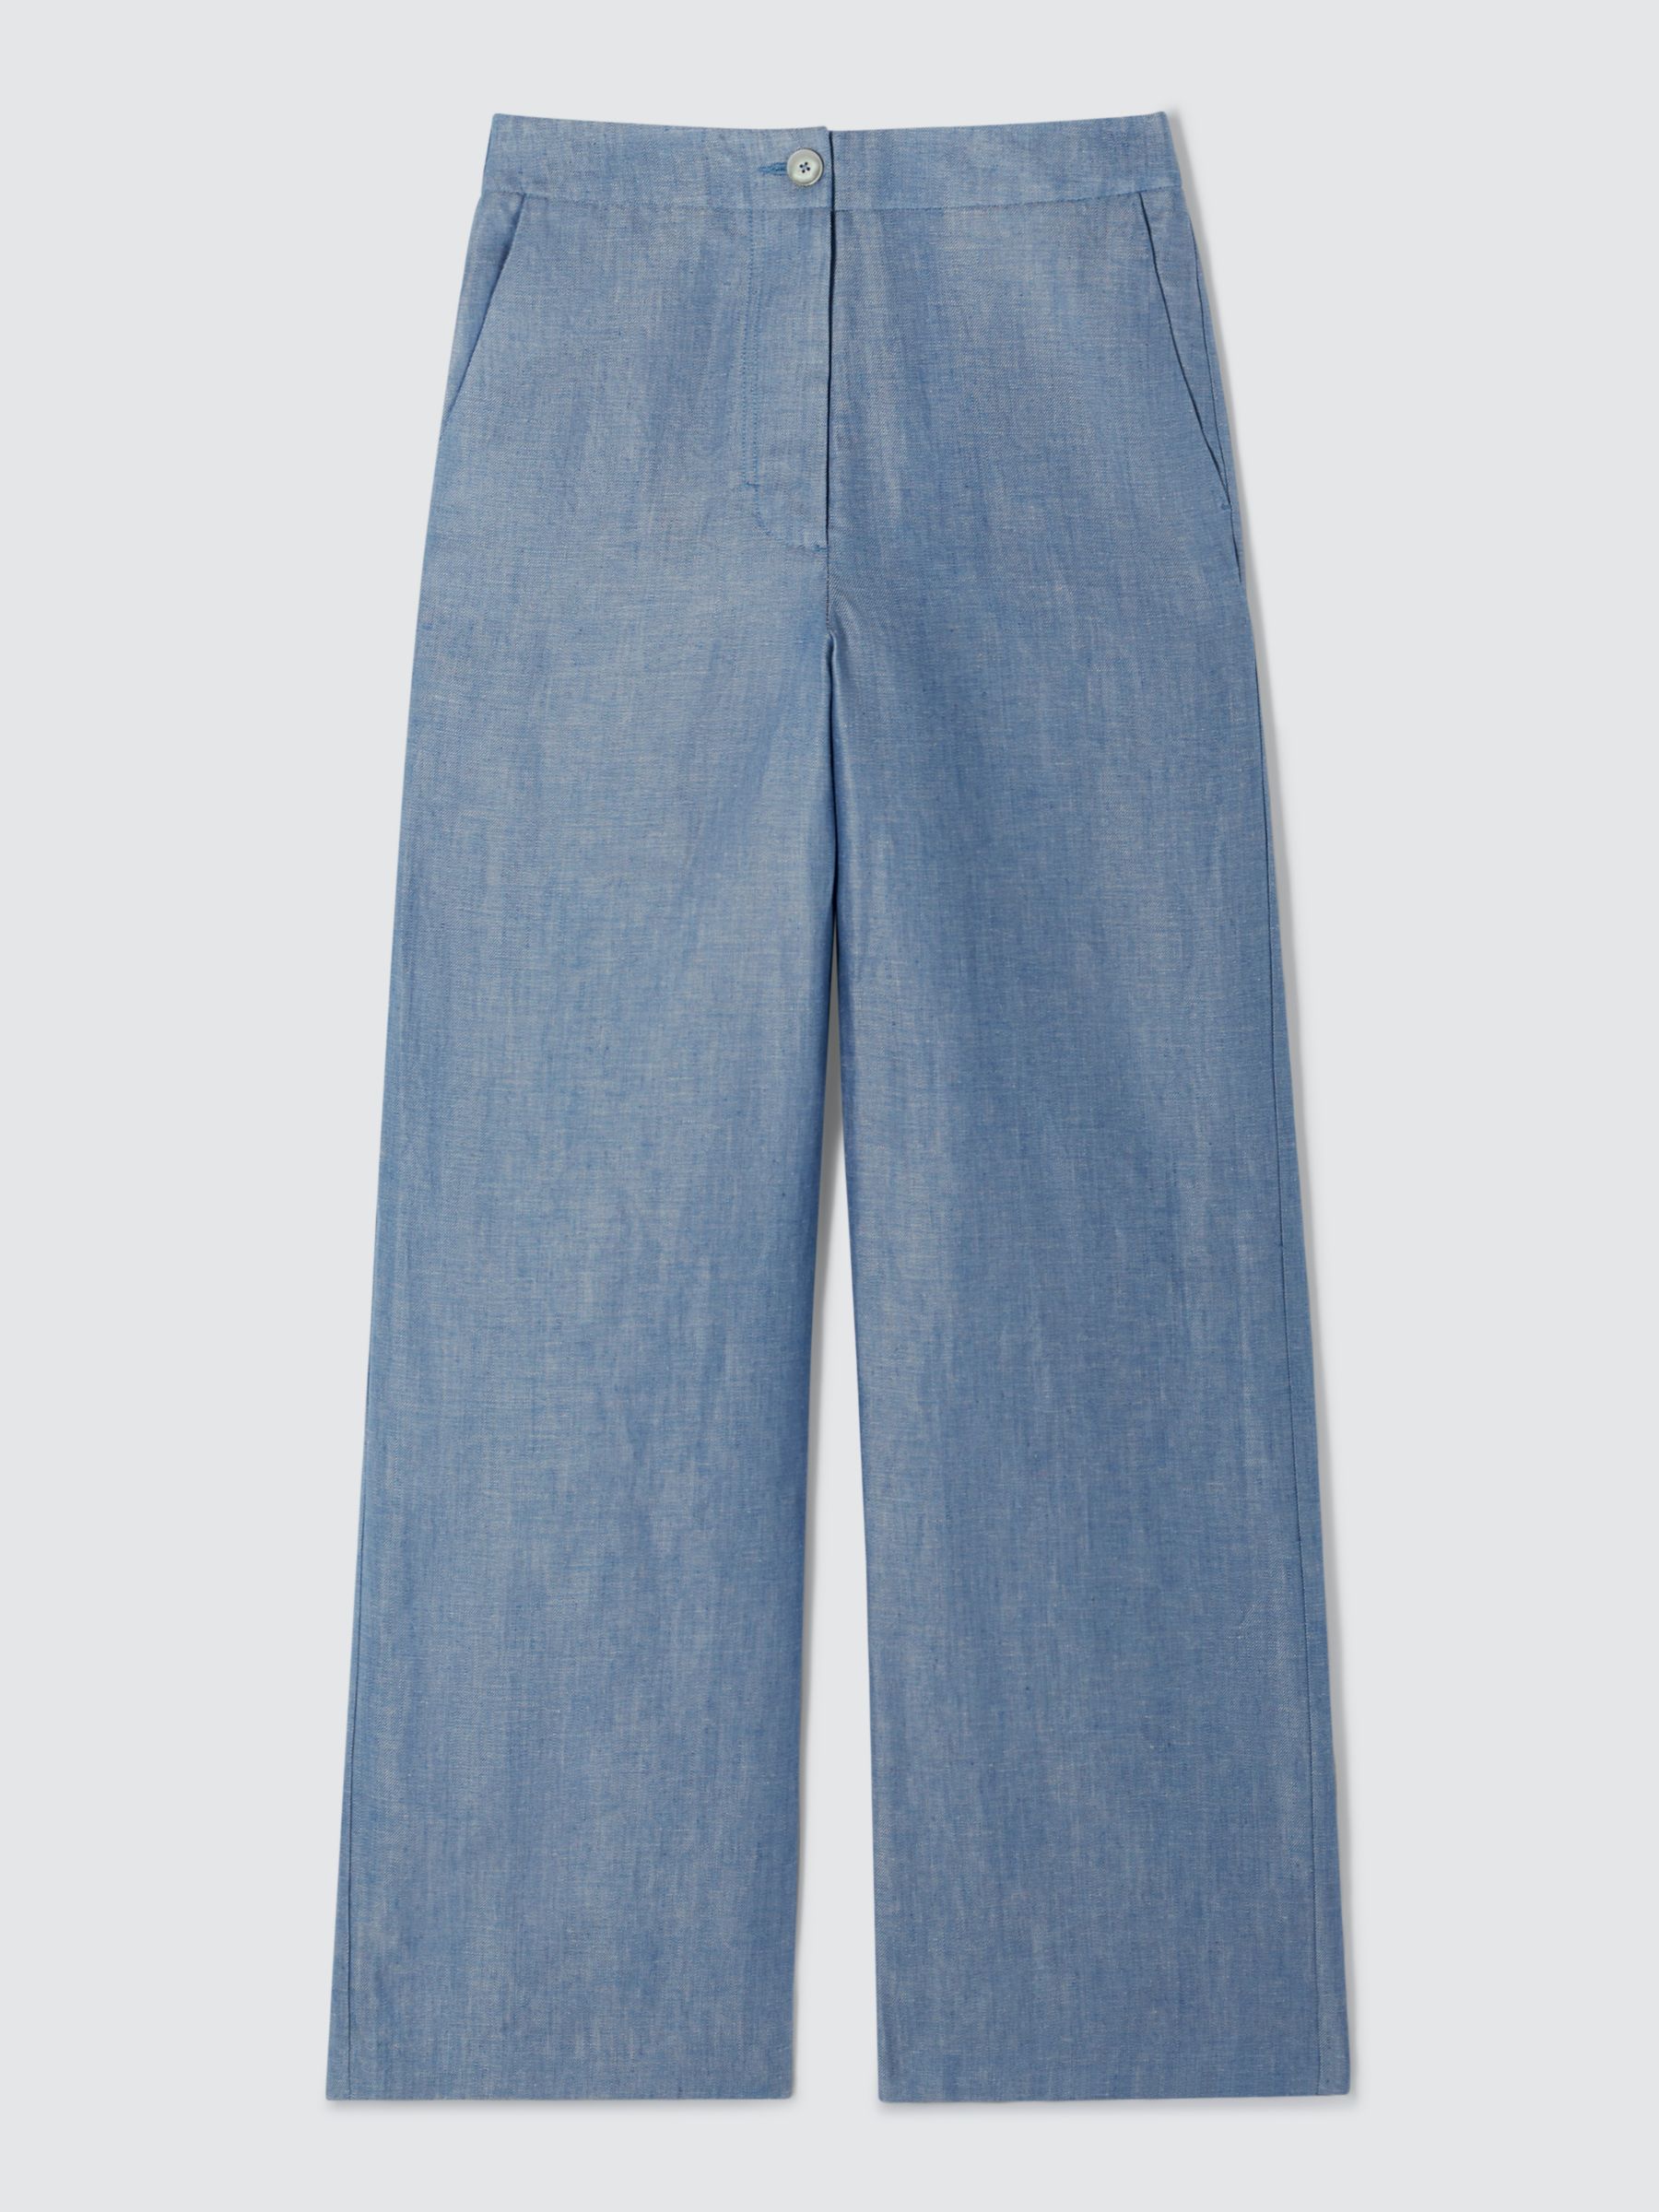 John Lewis Straight Fit Linen Trousers, Blue Twill, 10